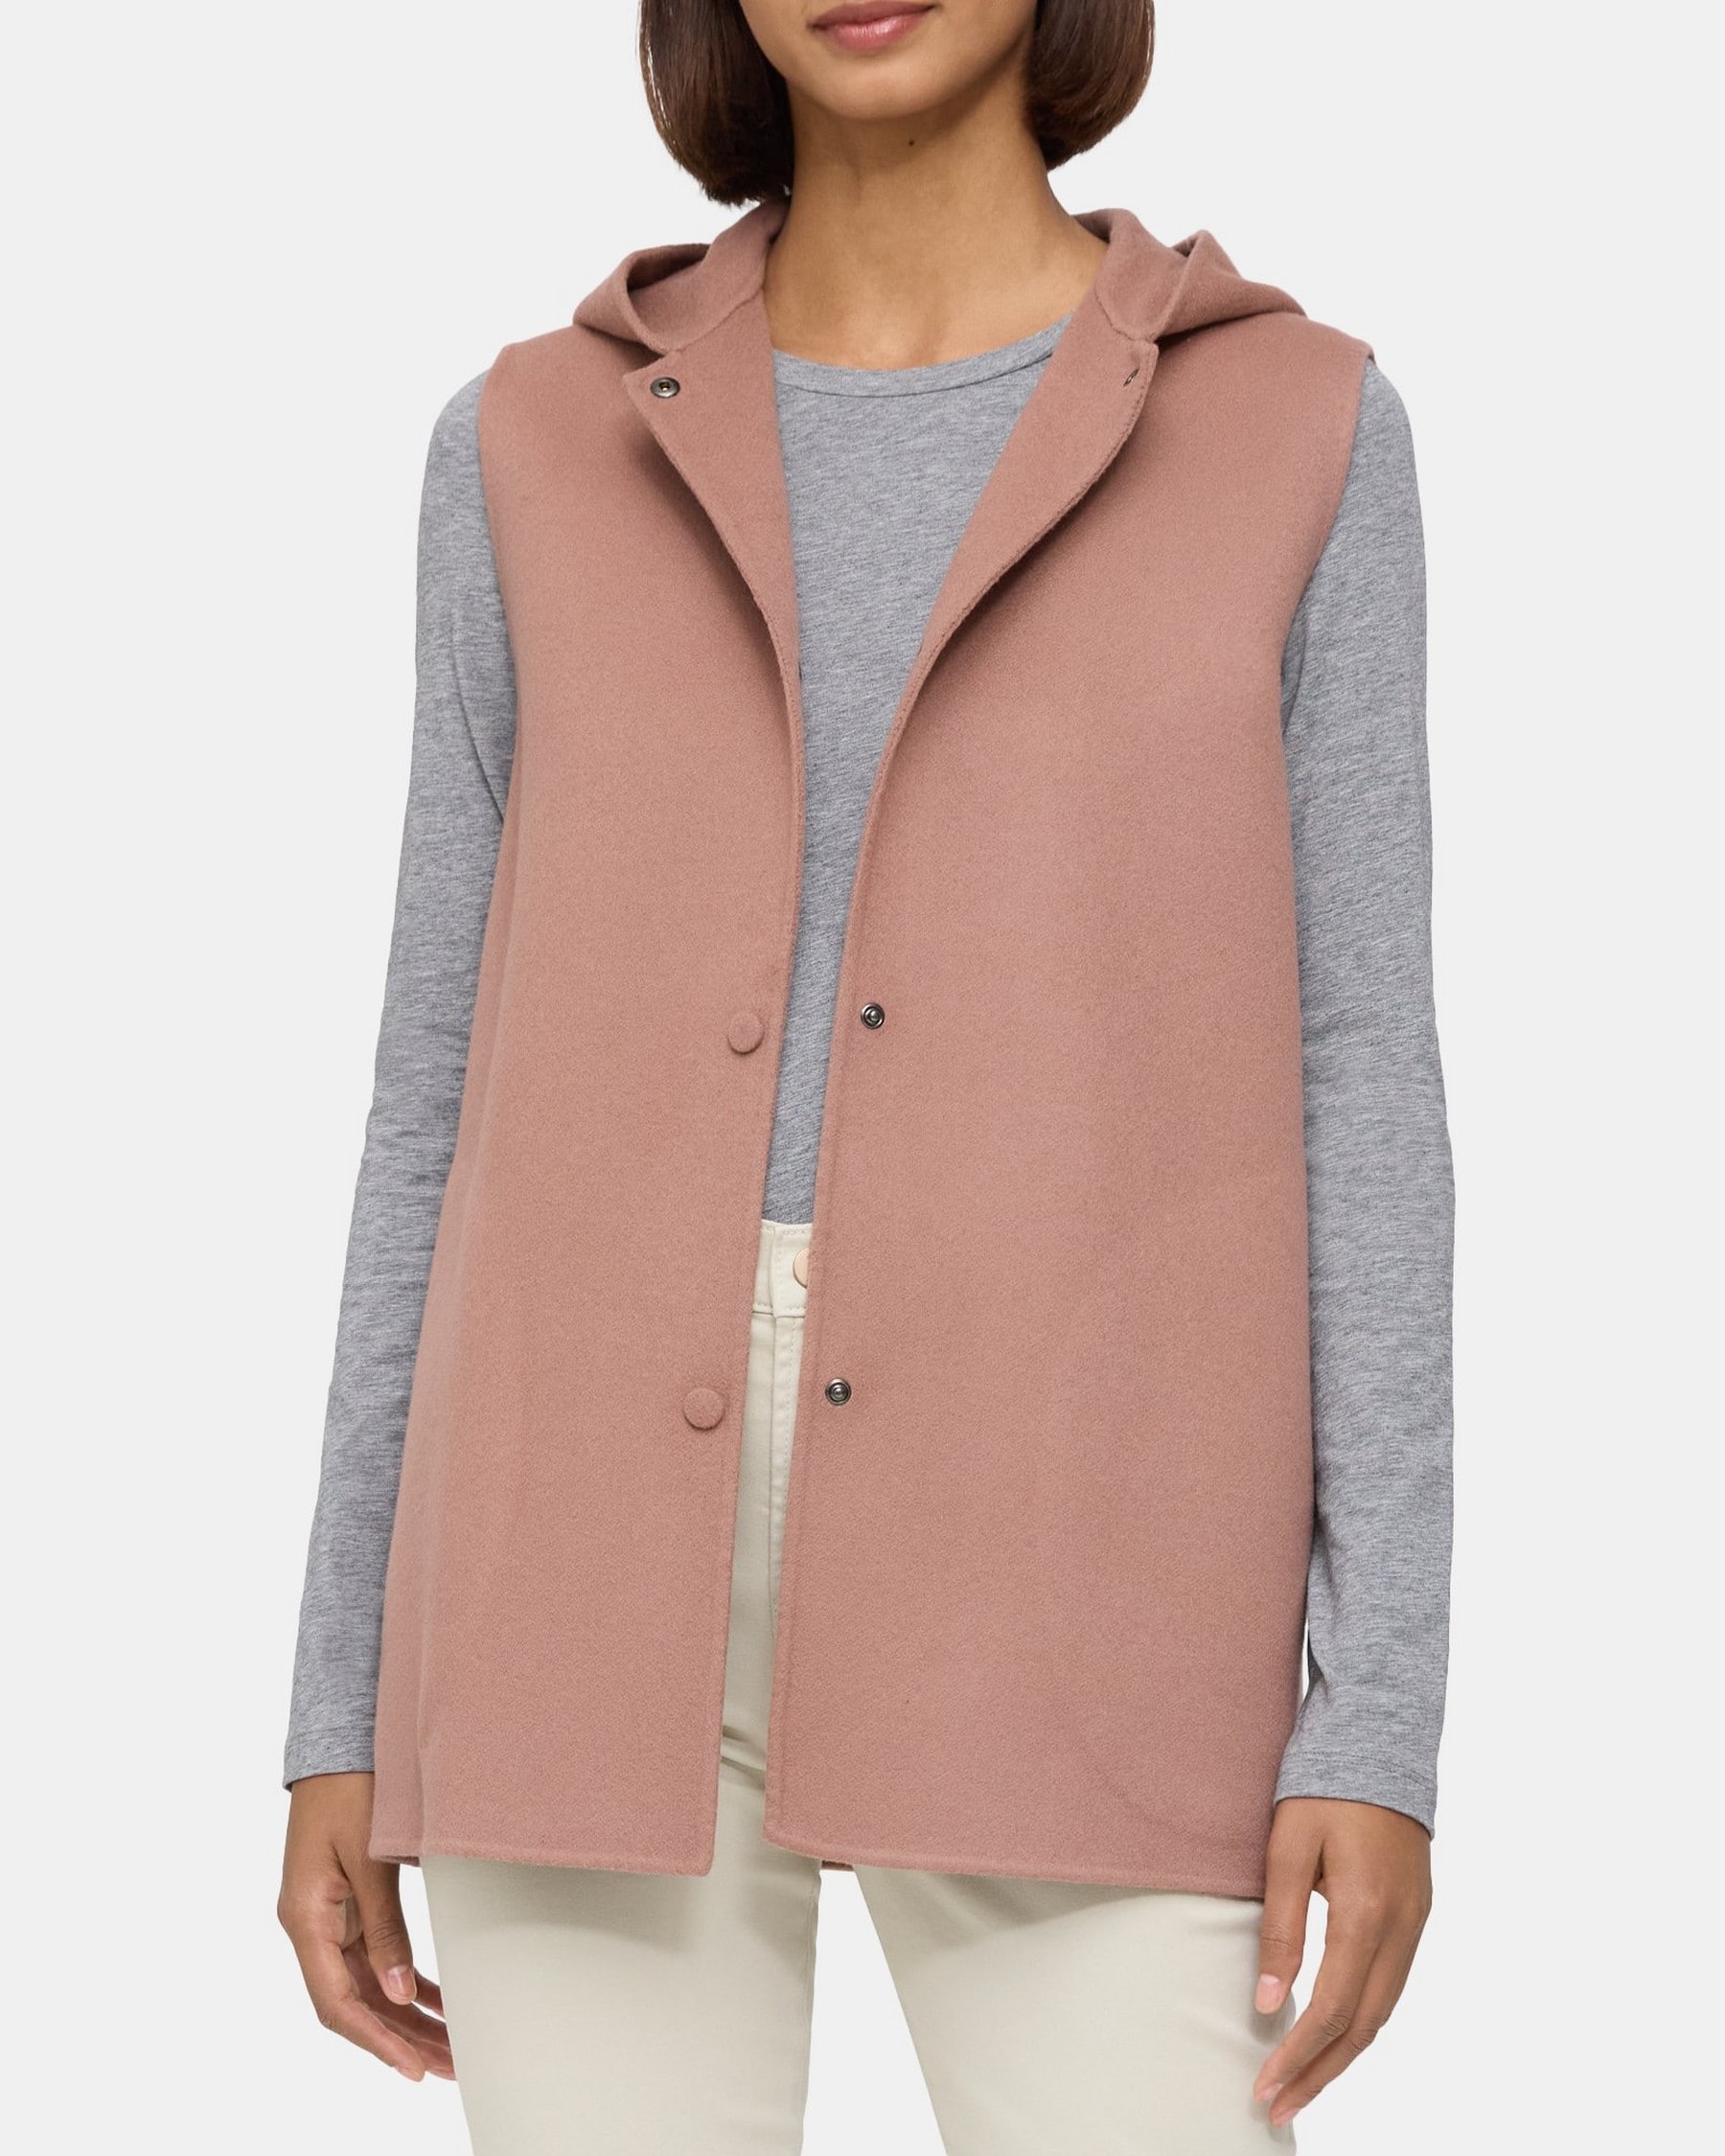 Theory Hooded Snap Vest in Double-Face Wool-Cashmere